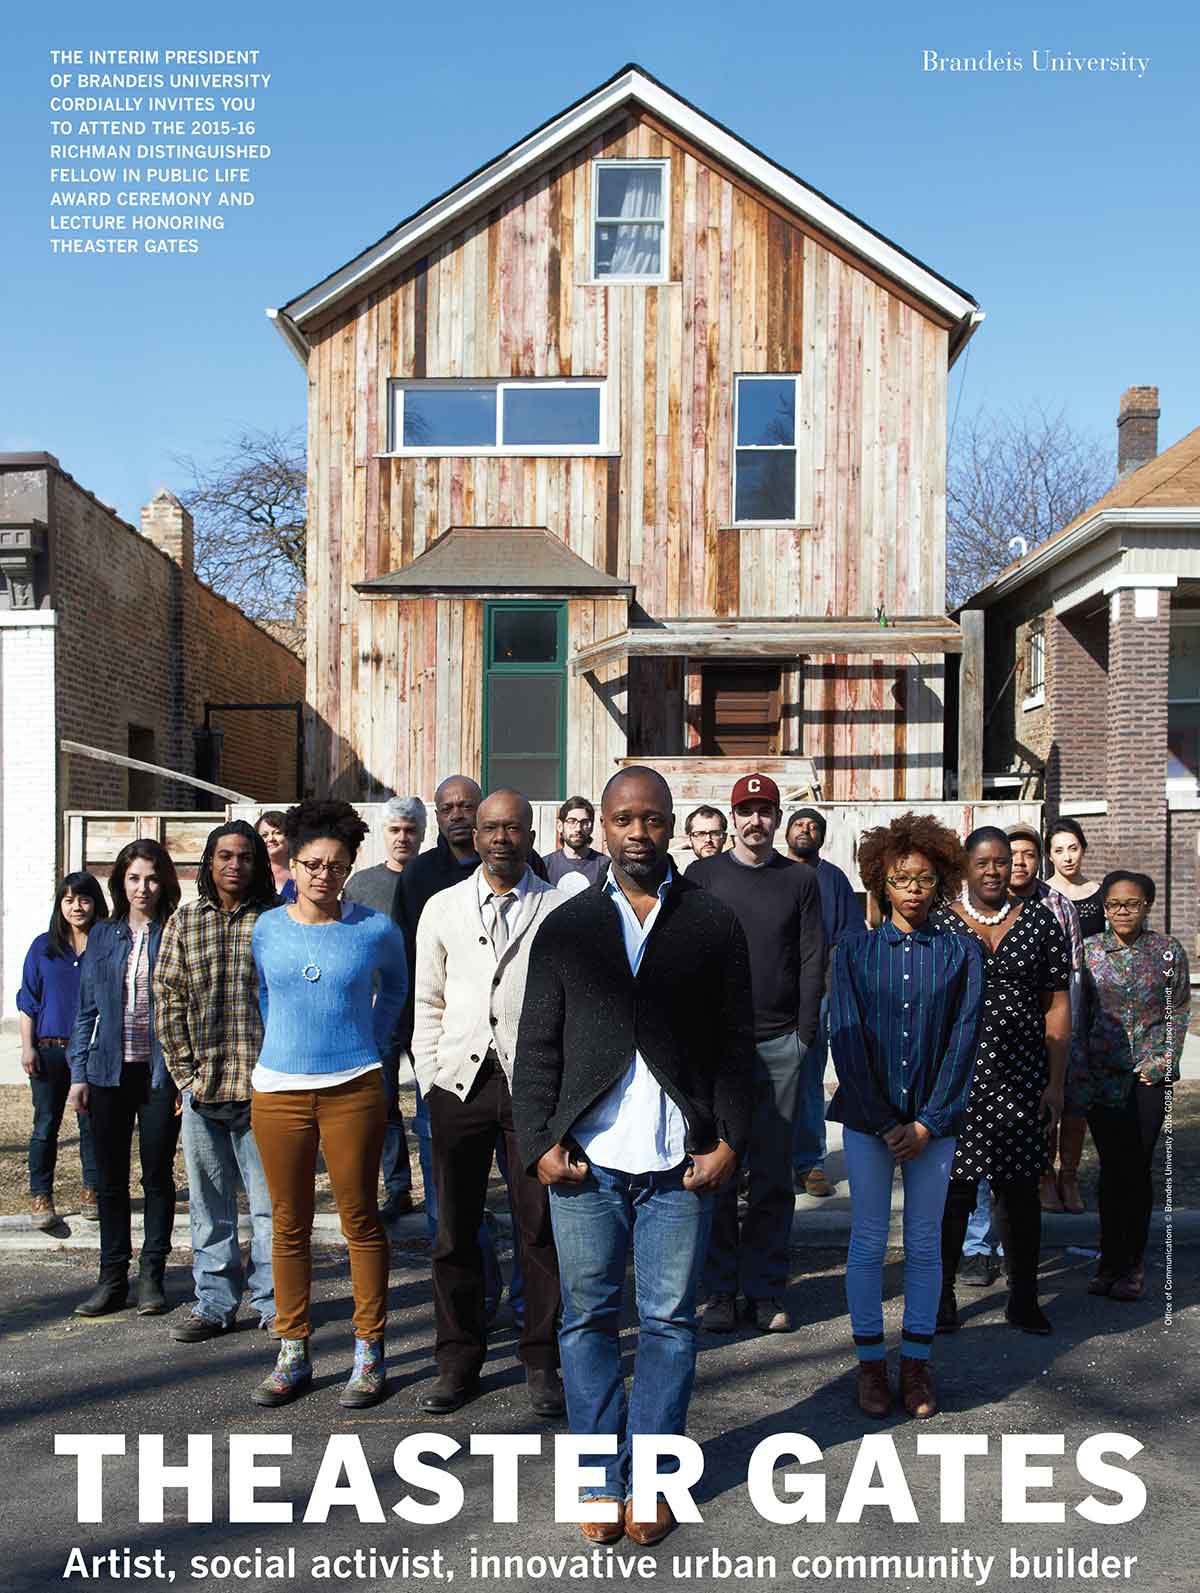 Theaster Gates stands with a large group behind him, standing in front of a house